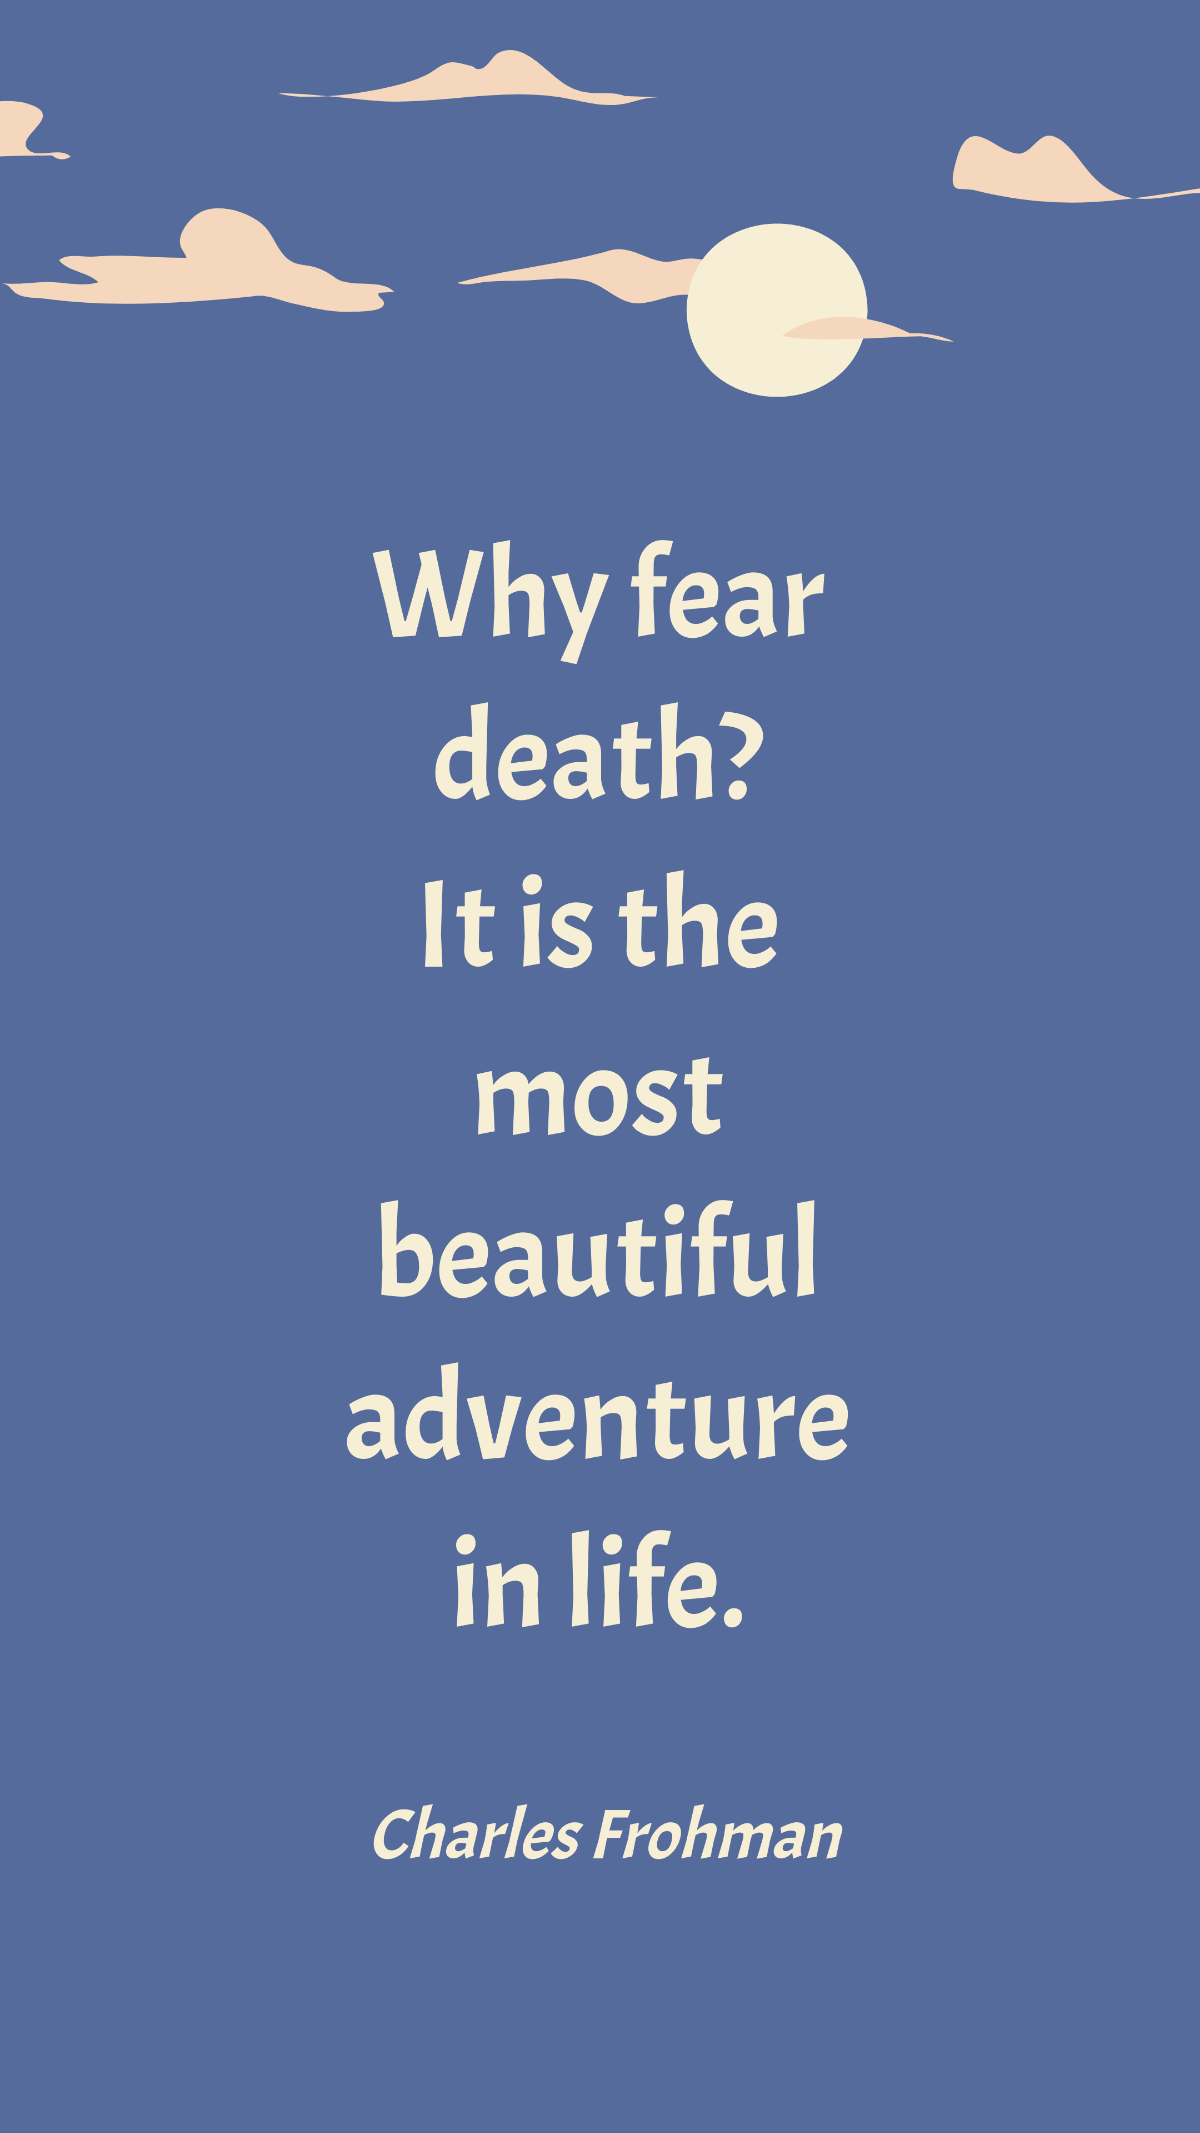 Charles Frohman - Why fear death? It is the most beautiful adventure in life. Template